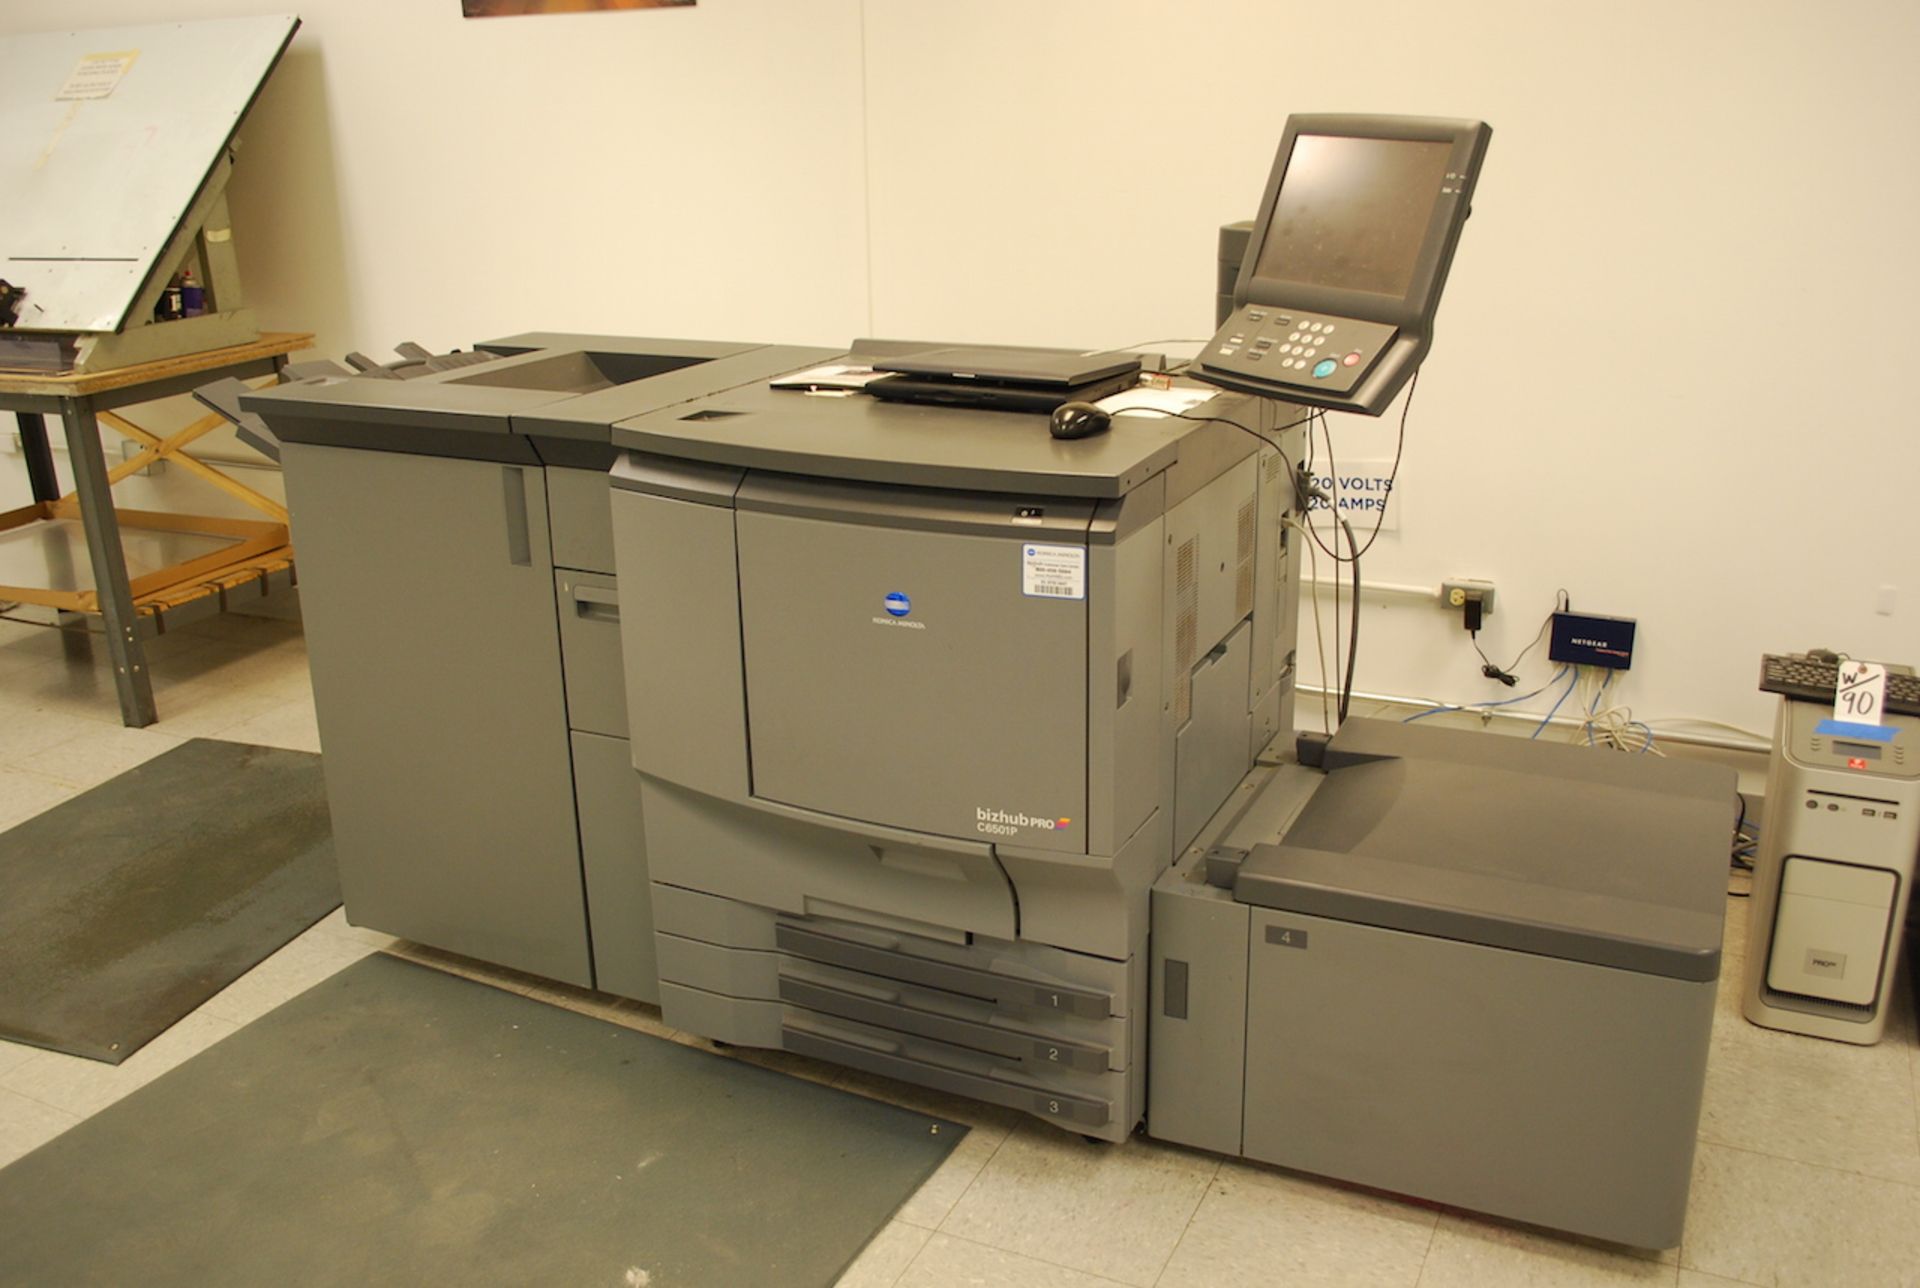 KONICA MINOLTA BIZHUB PRO C6501P COLOR PRODUCTION PRINT SYSTEM: S/N N/A (NEW 2008); Variable Data; - Image 2 of 4